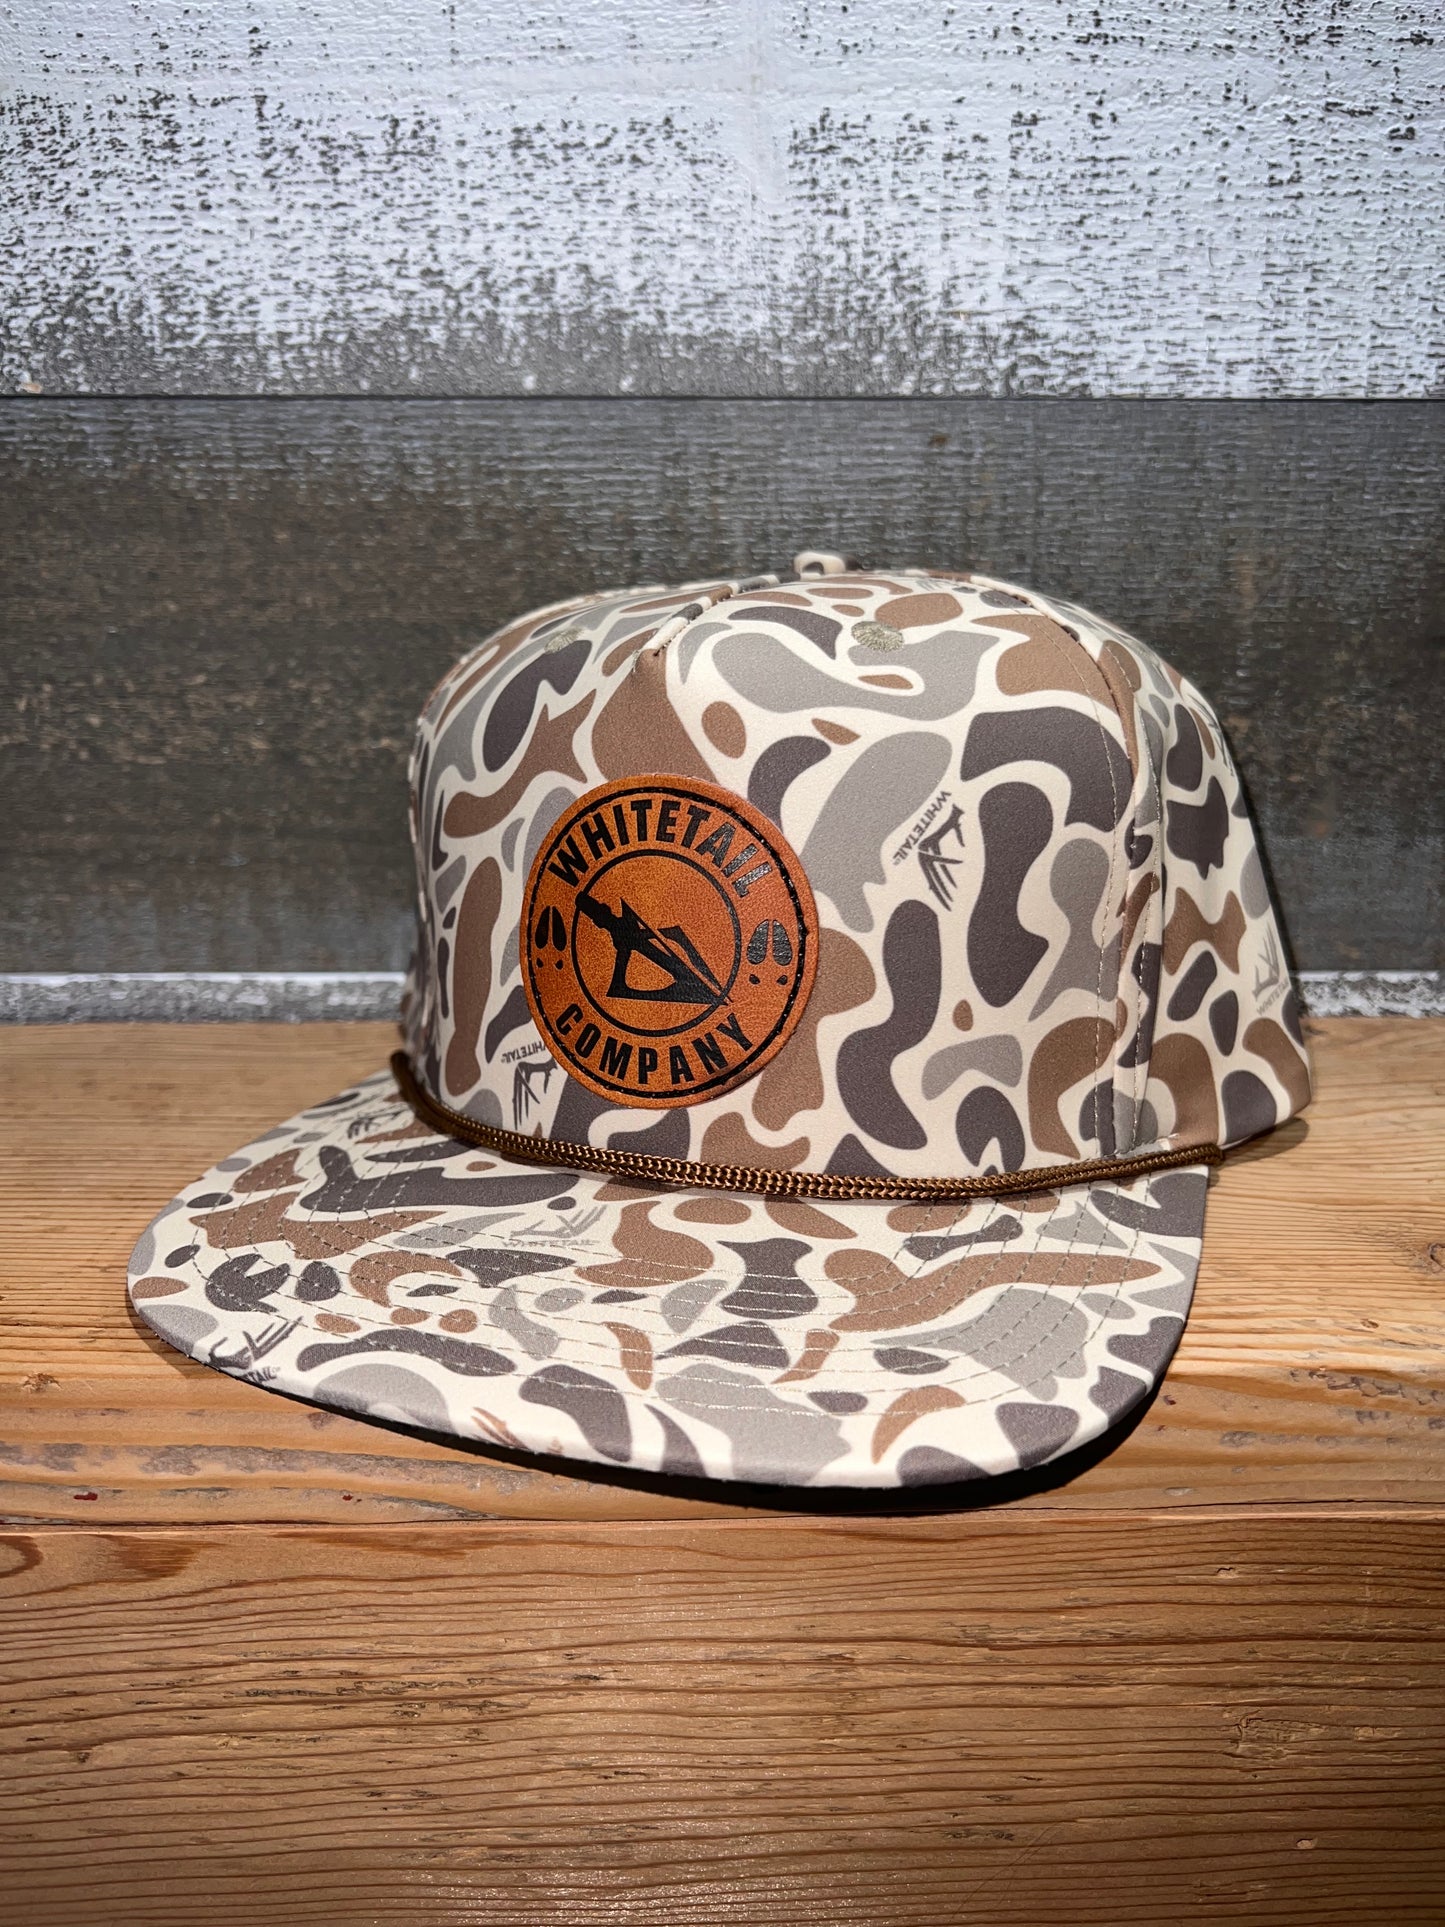 Whitetail Co. Leather Broadhead Patch Old Camo Trucker